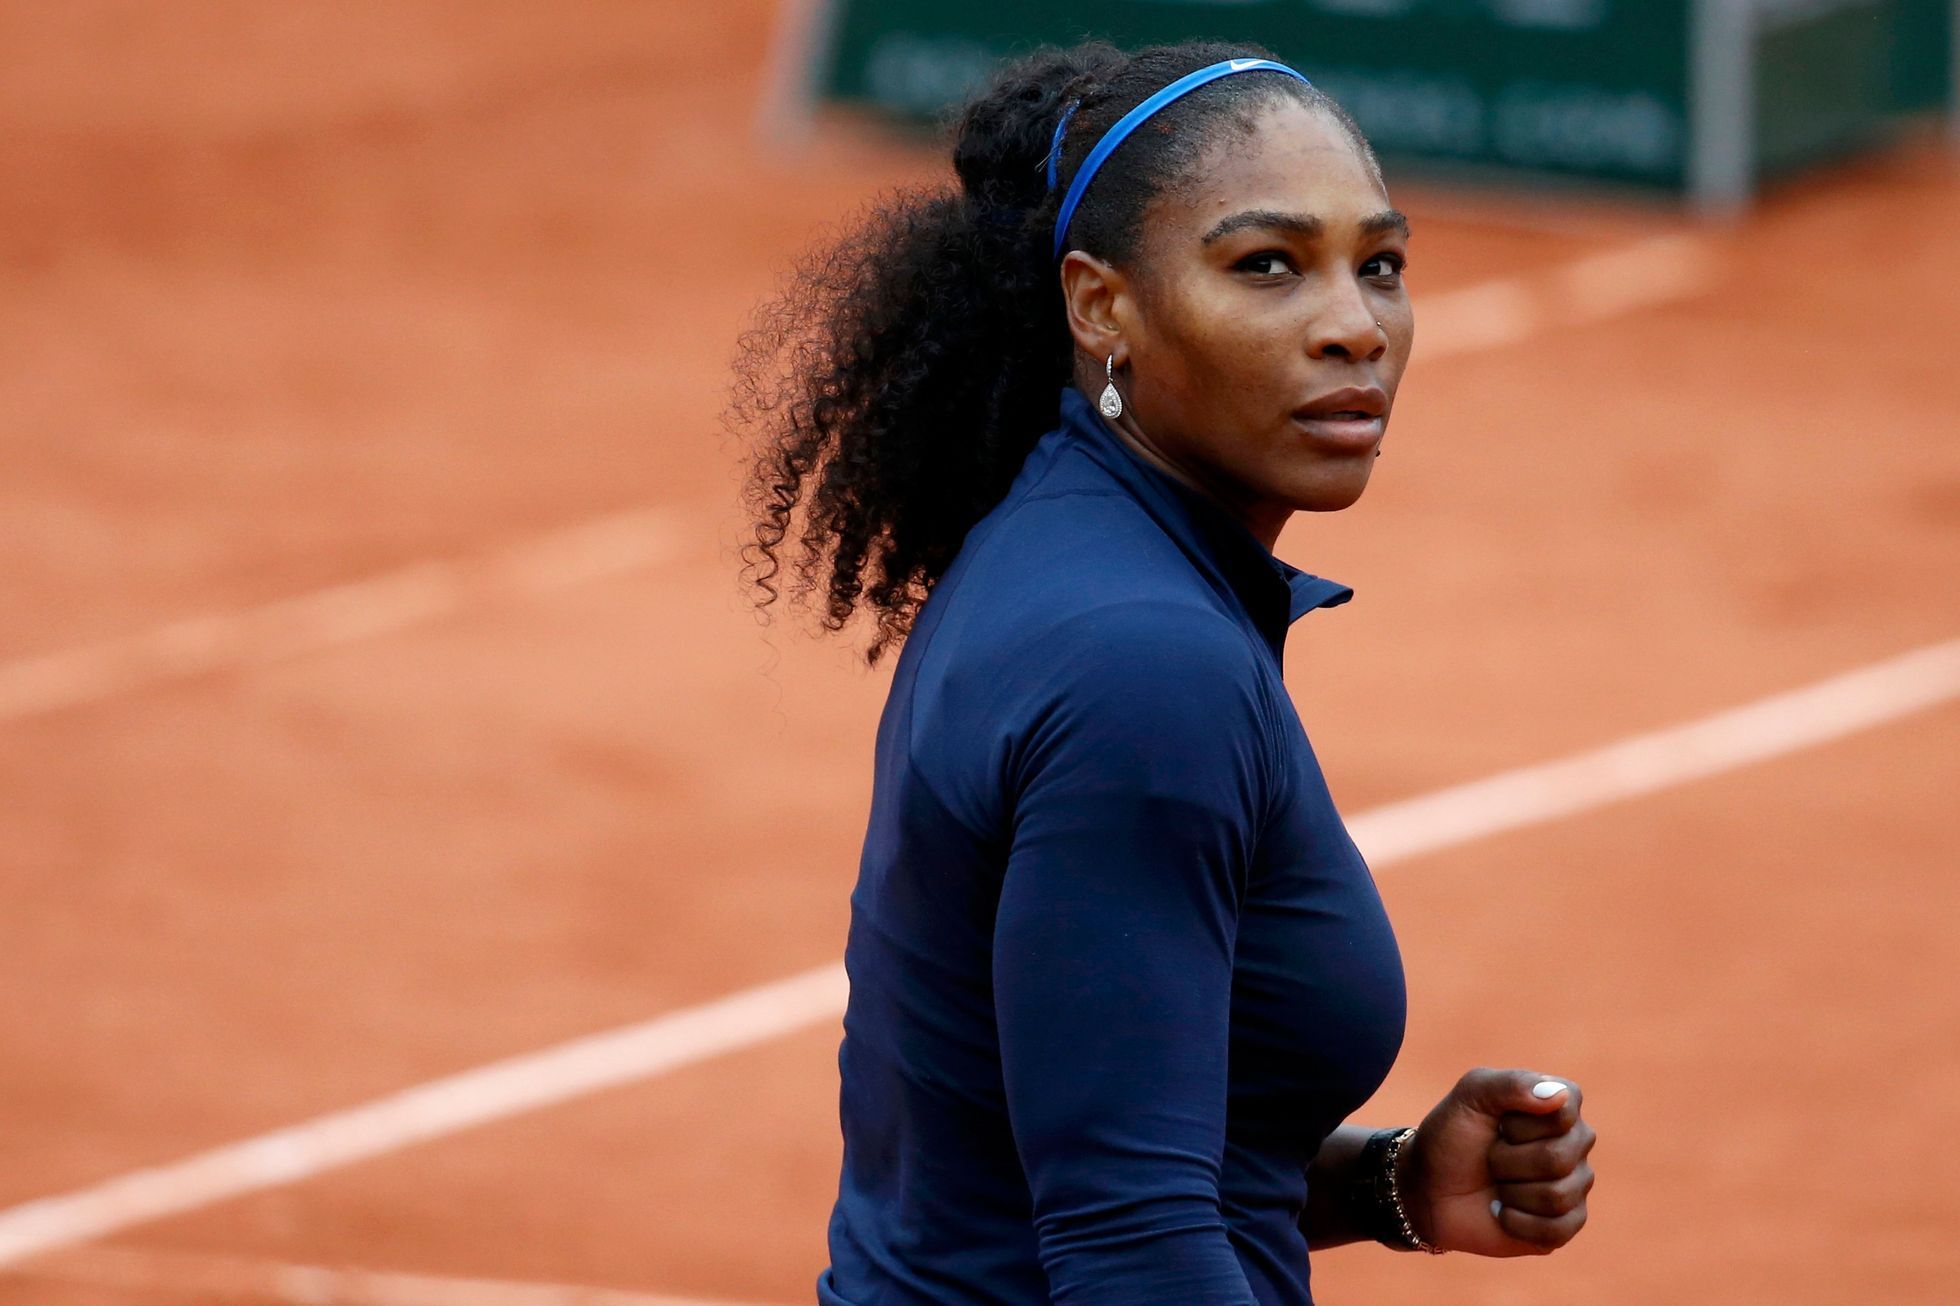 Serena Williamsová na French Open 2016